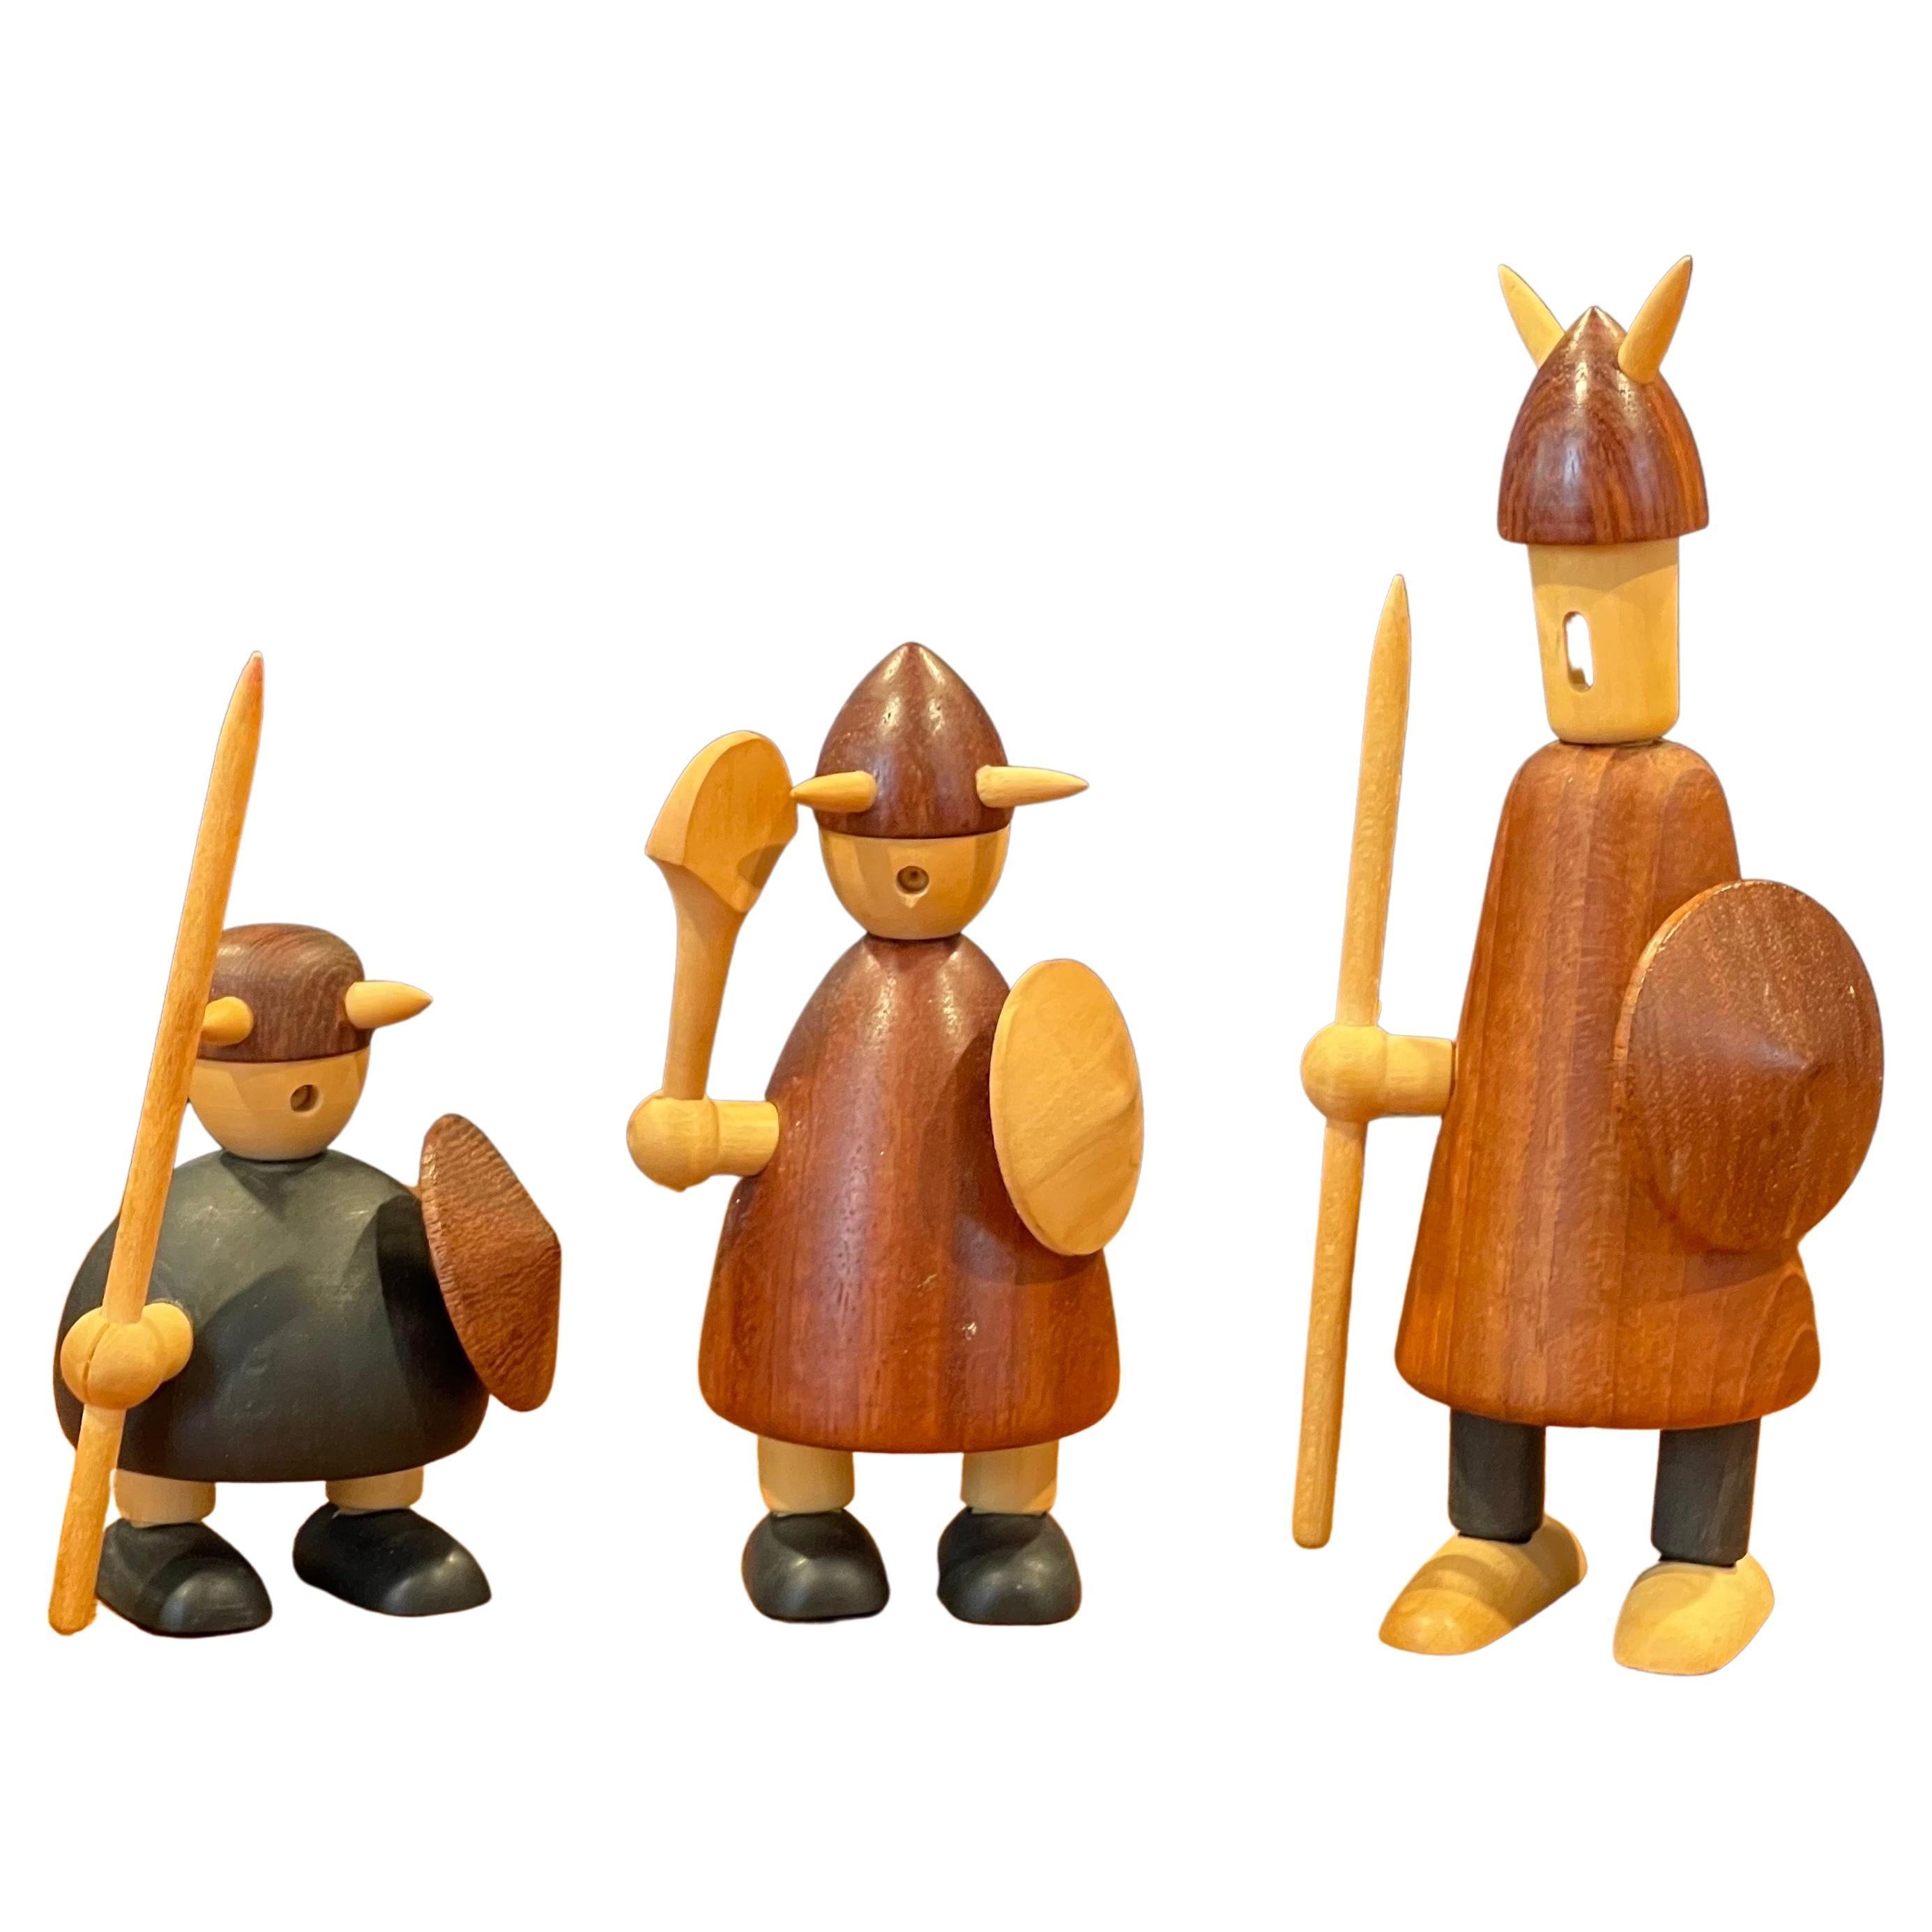 Set of three like new mid-century Danish viking figures made of mixed woods with original box by Jacob Jensen, circa 1950s. The figures are in excellent vintage condition and measure: 5.5